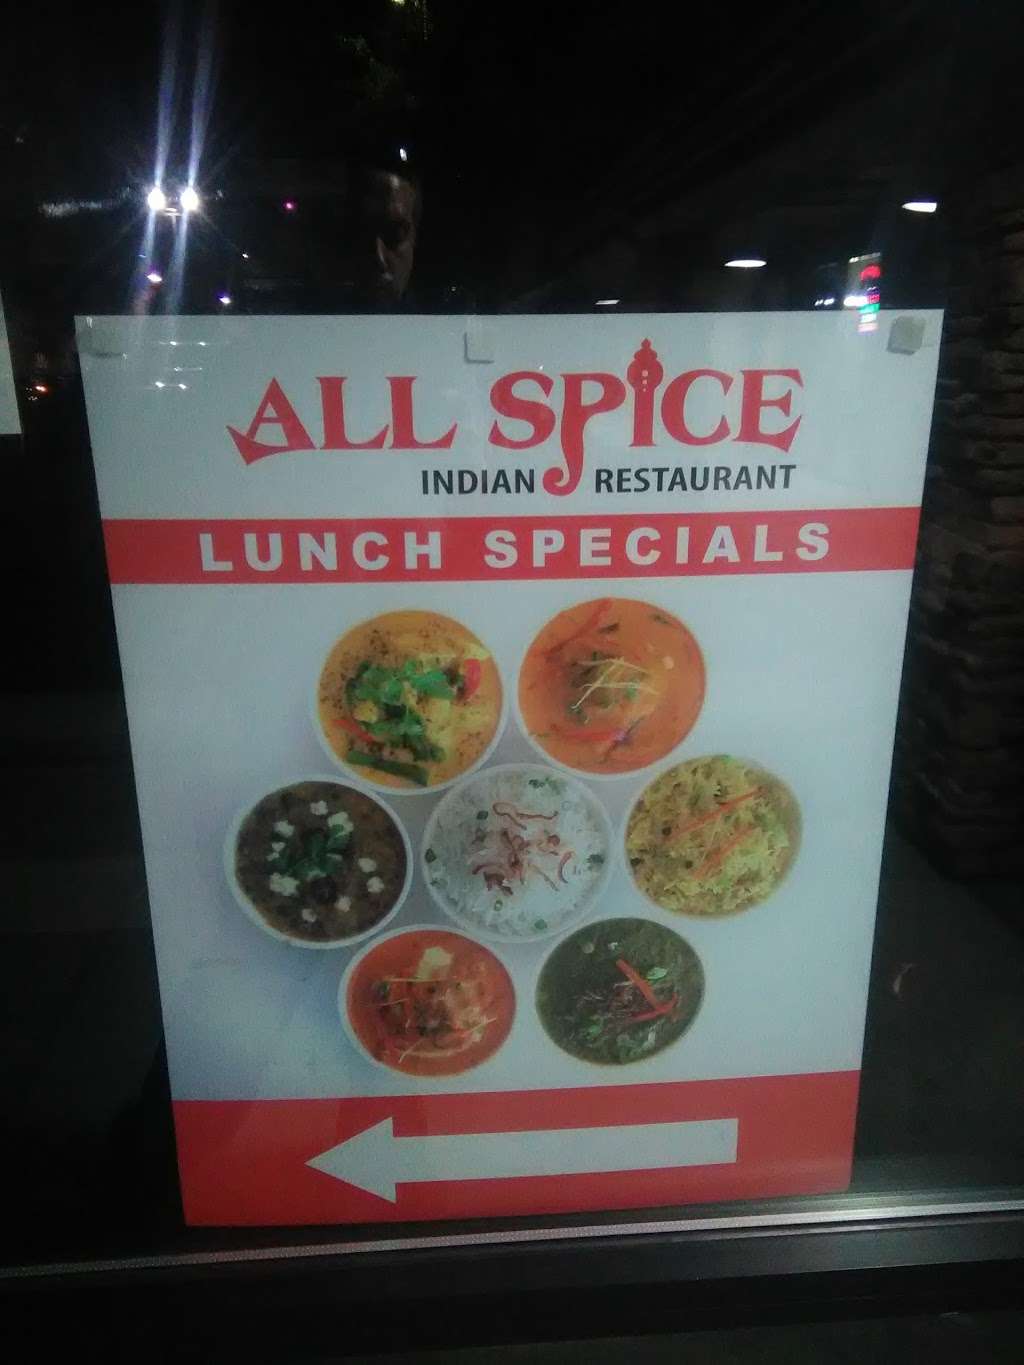 All Spice | 100 W American Canyon Rd, American Canyon, CA 94503 | Phone: (707) 645-0814